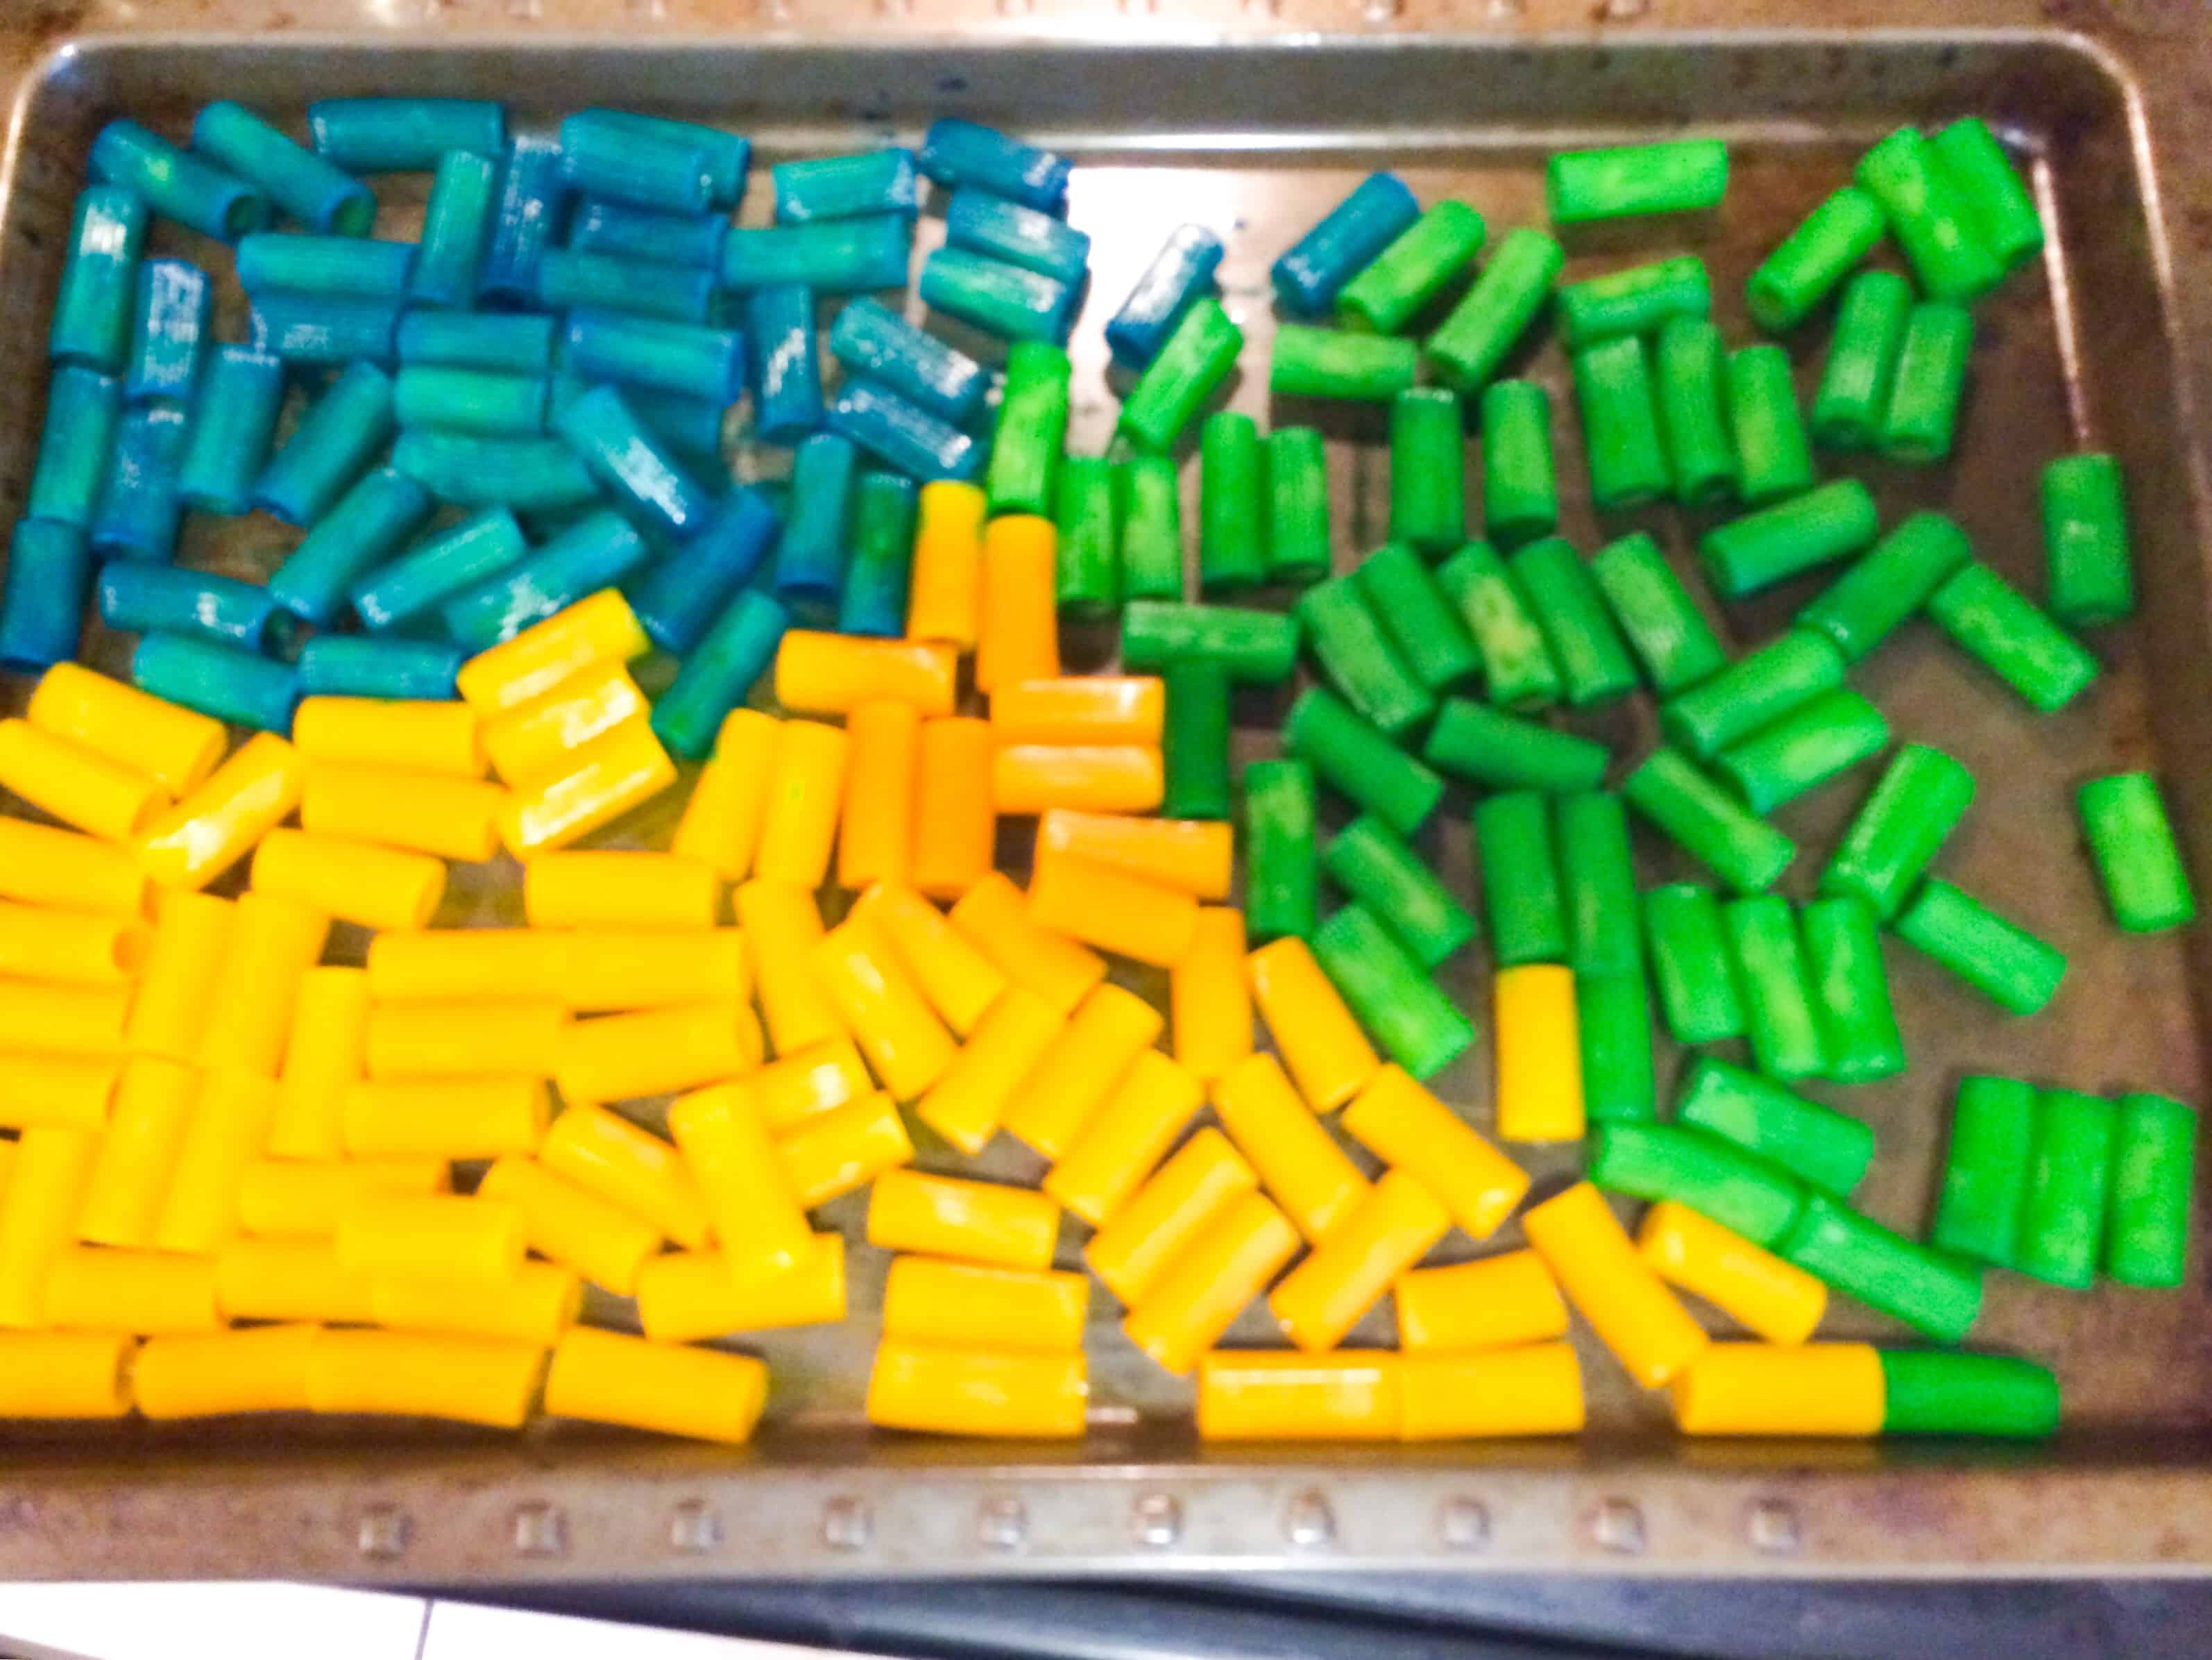 This school sensory bin uses colored pasta as a base and a wooden bus, school and people toys for kids to play with. A great way to prep for back to school. #sensoryplay #parenting #kidsactivities #sensory #spd #preschool #backtoschool